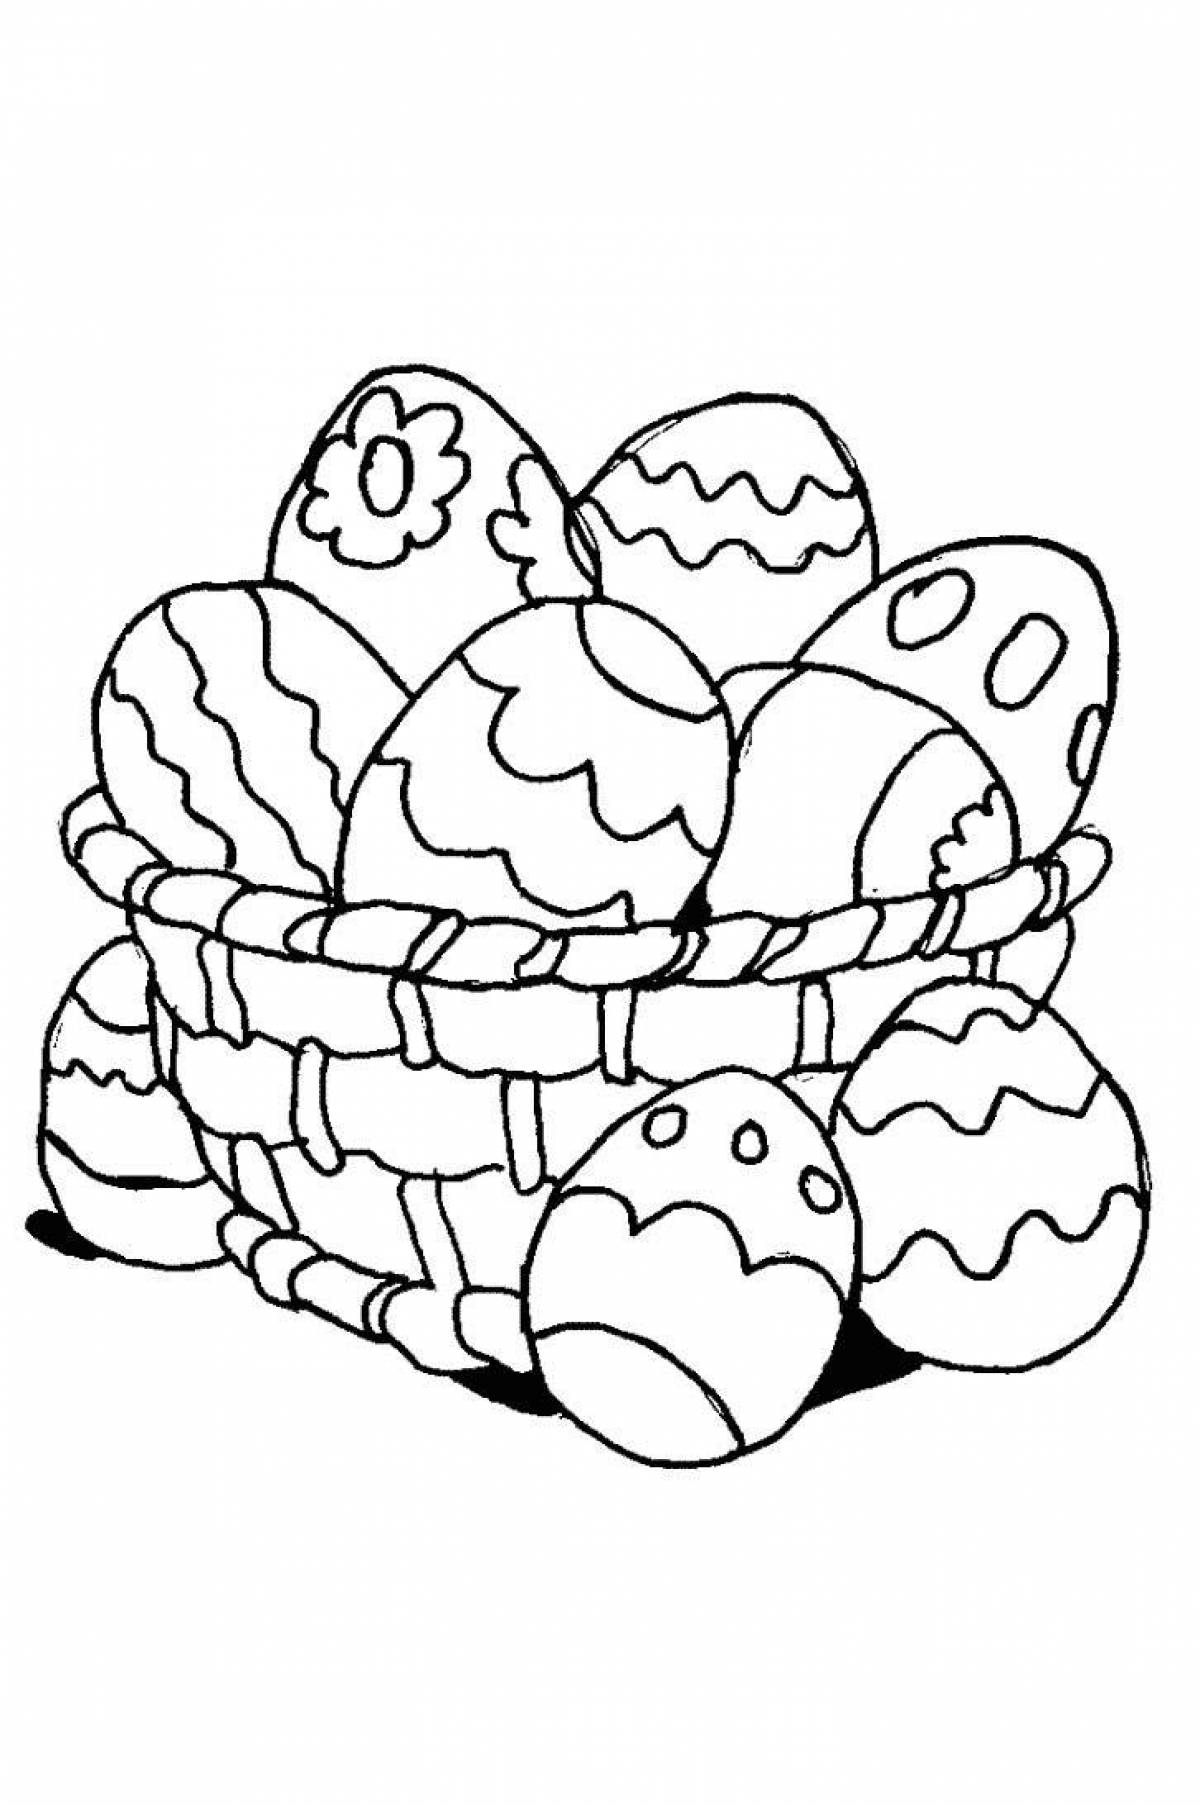 Adorable Easter coloring book